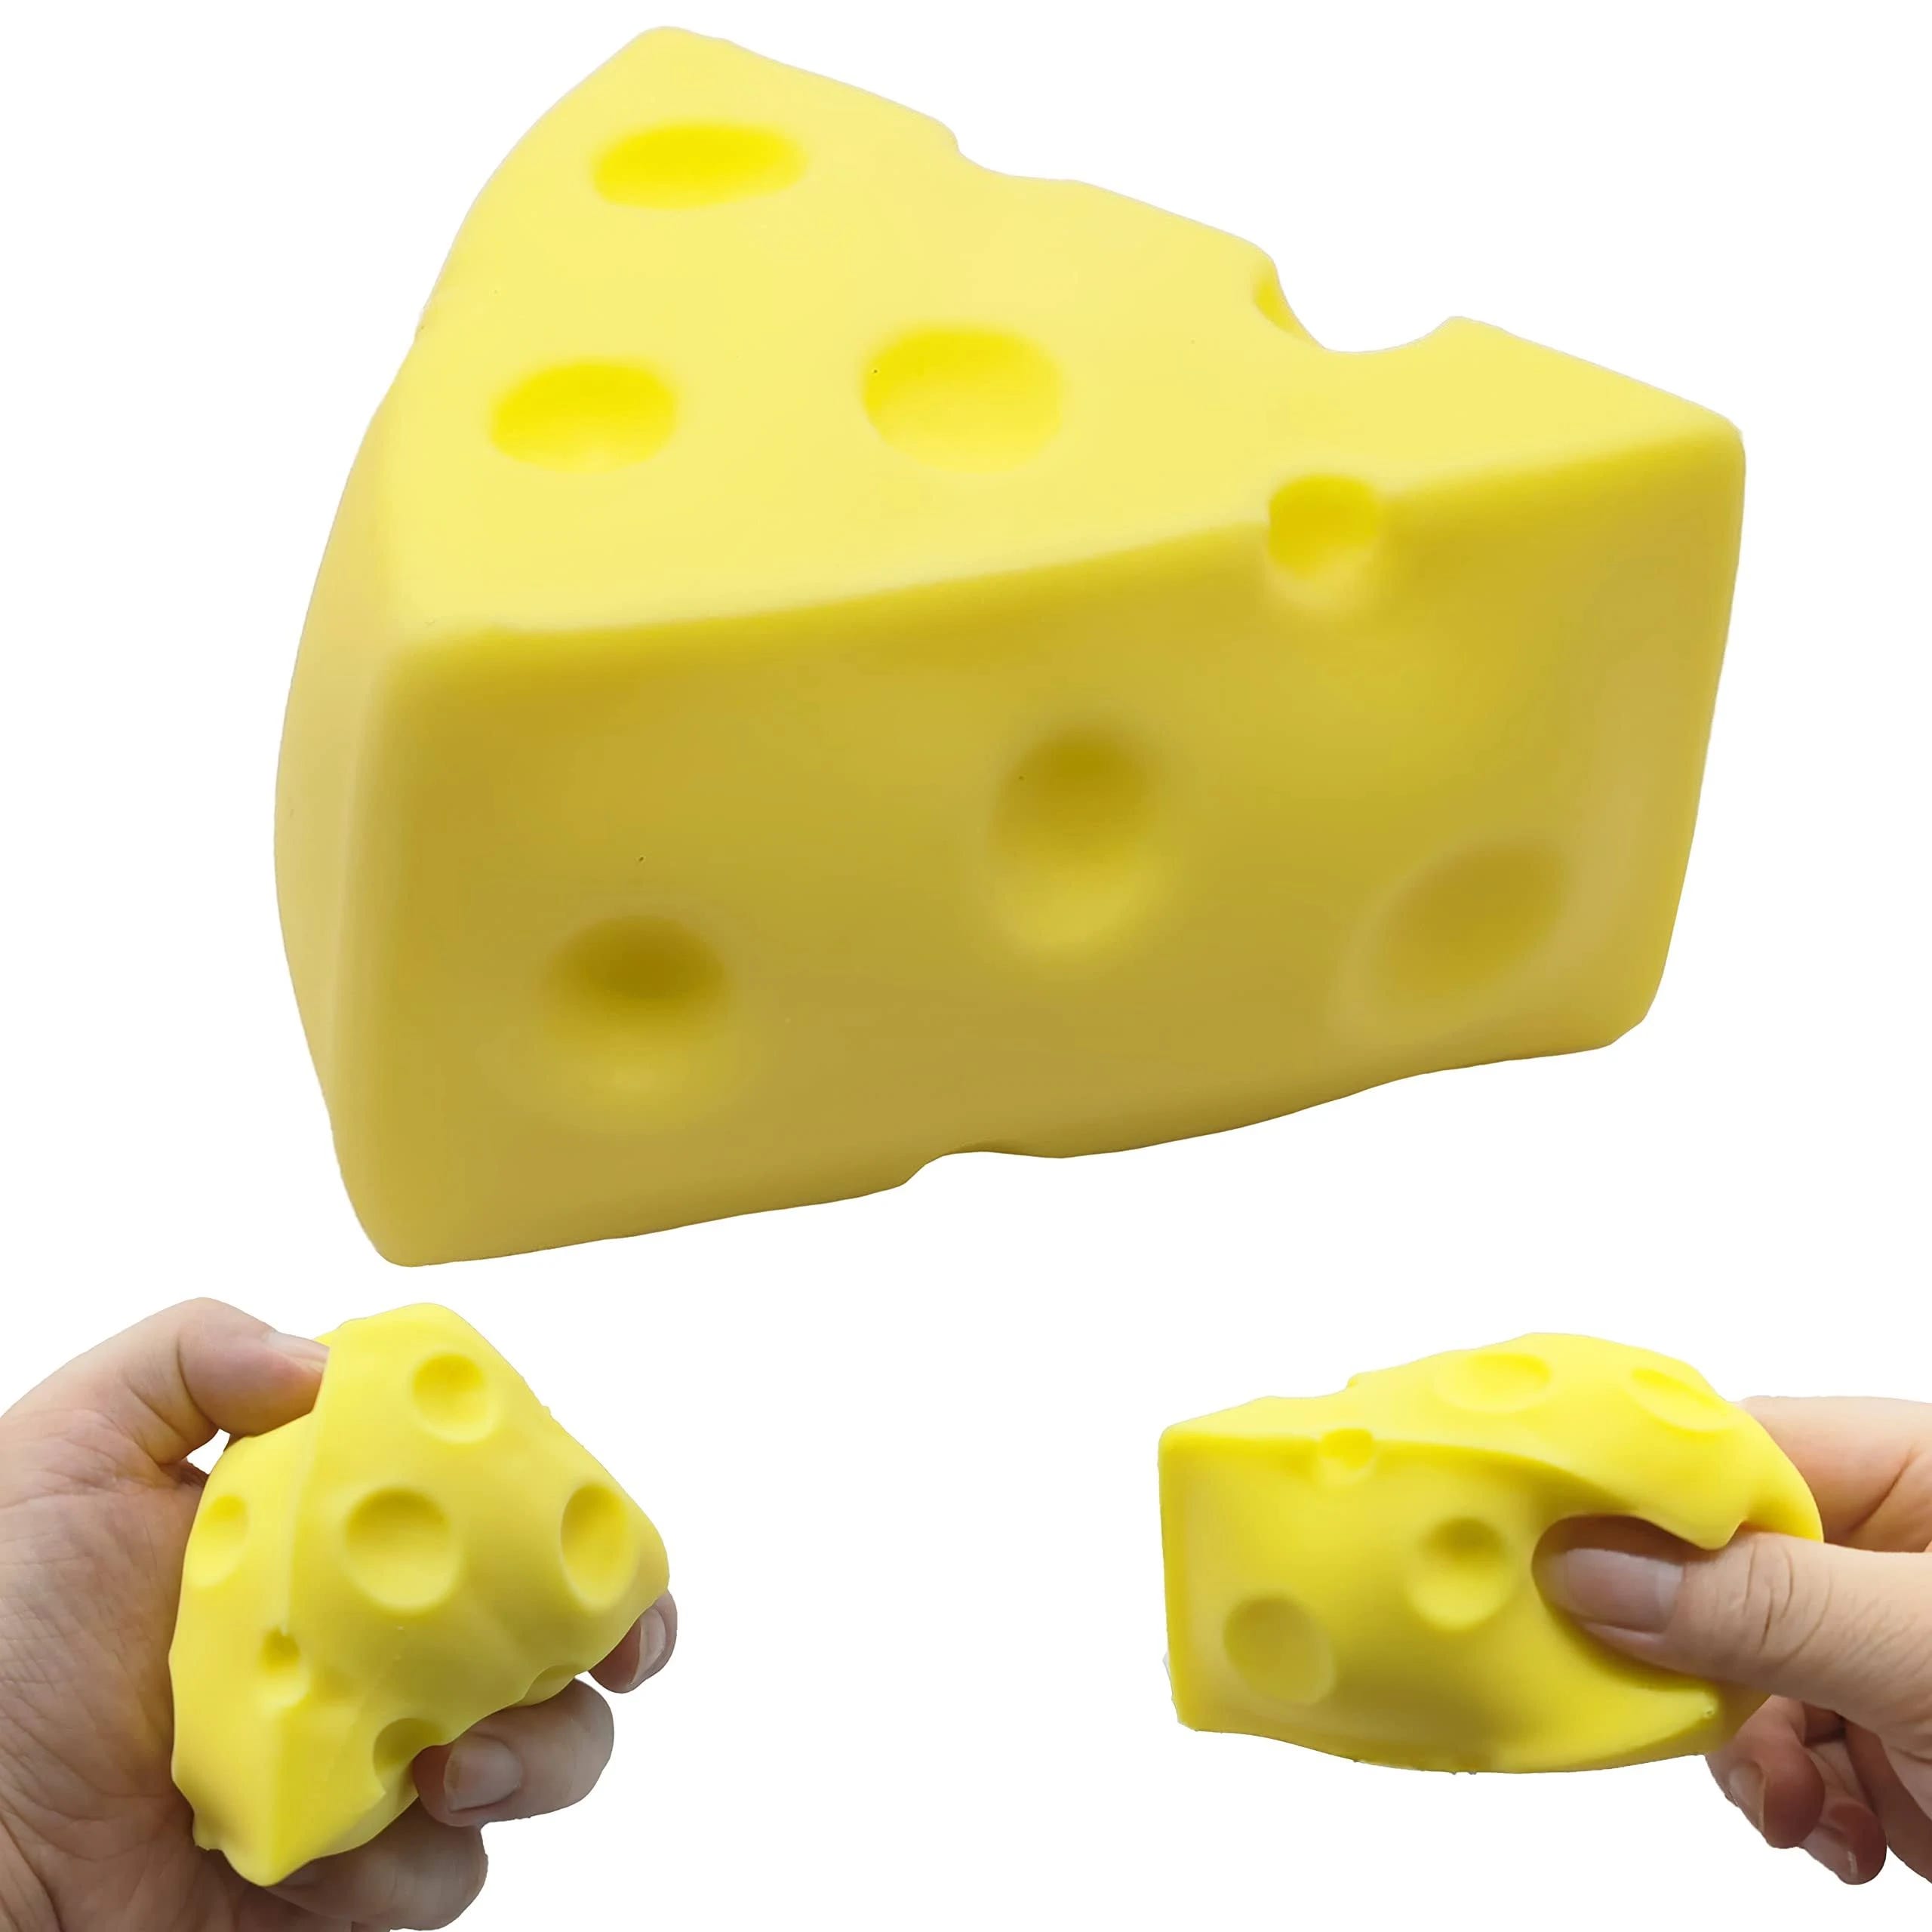 Fun Squeeze Cheese Toy for Stress Relief and Parties | Image